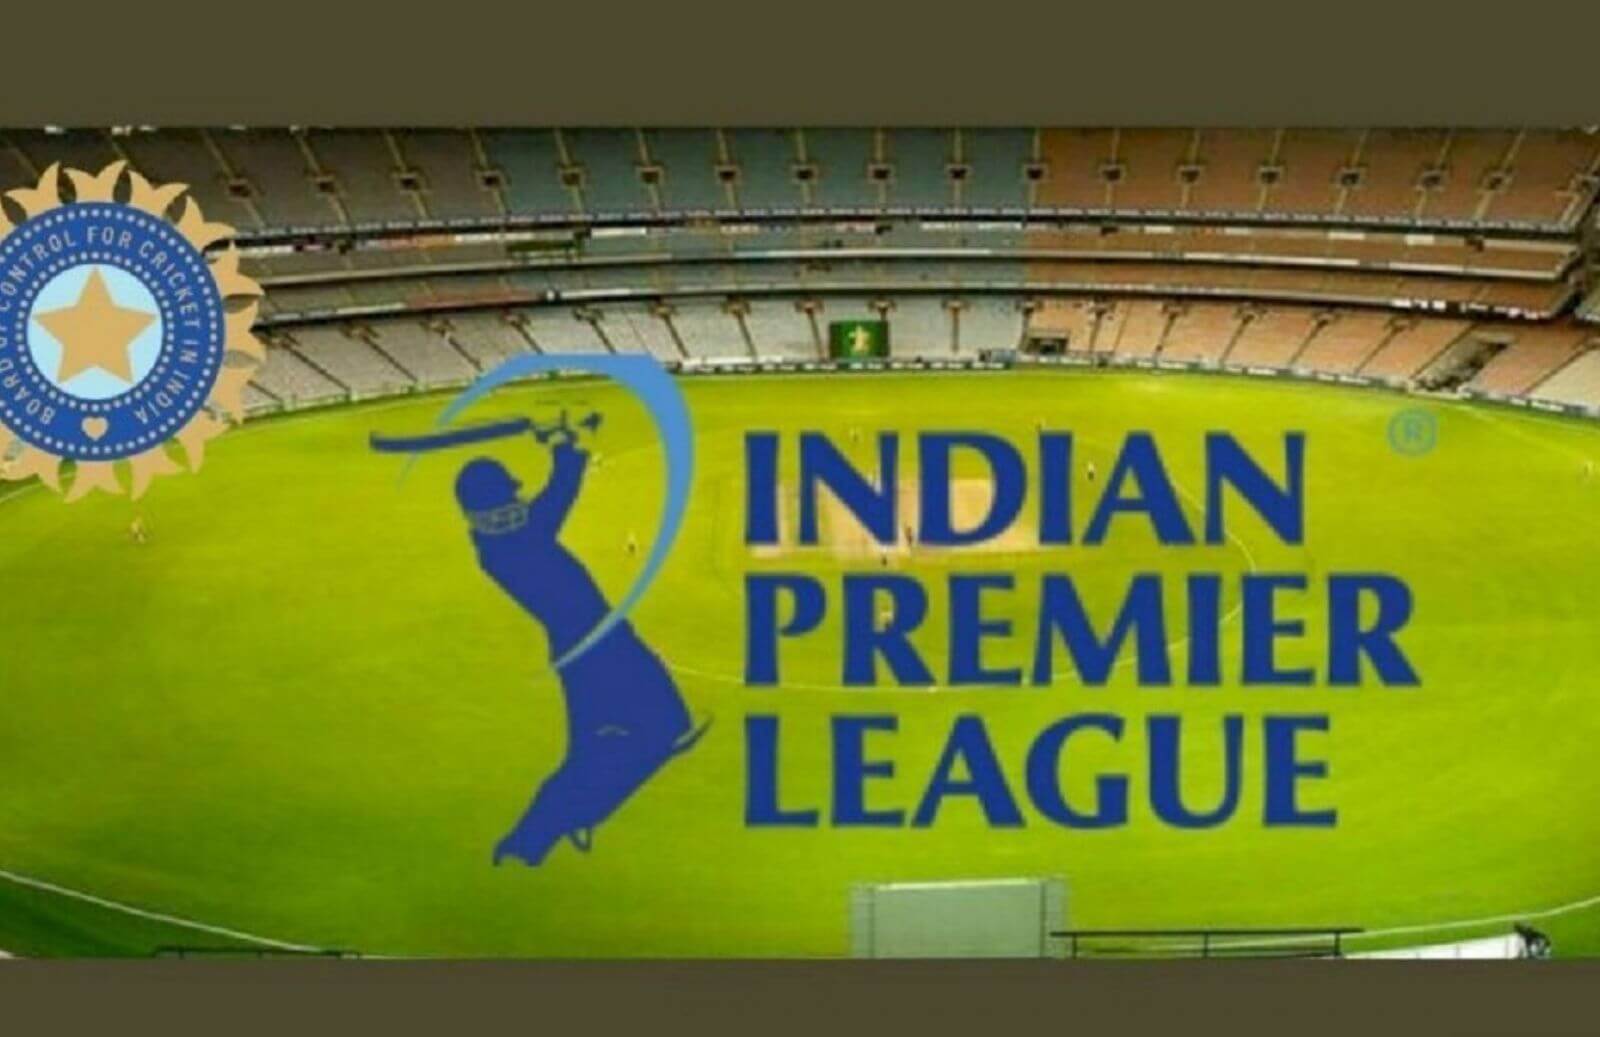 IPL 2021 -No New Team Introduction In The 14th Edition Of Indian Premier League - BCCI Official